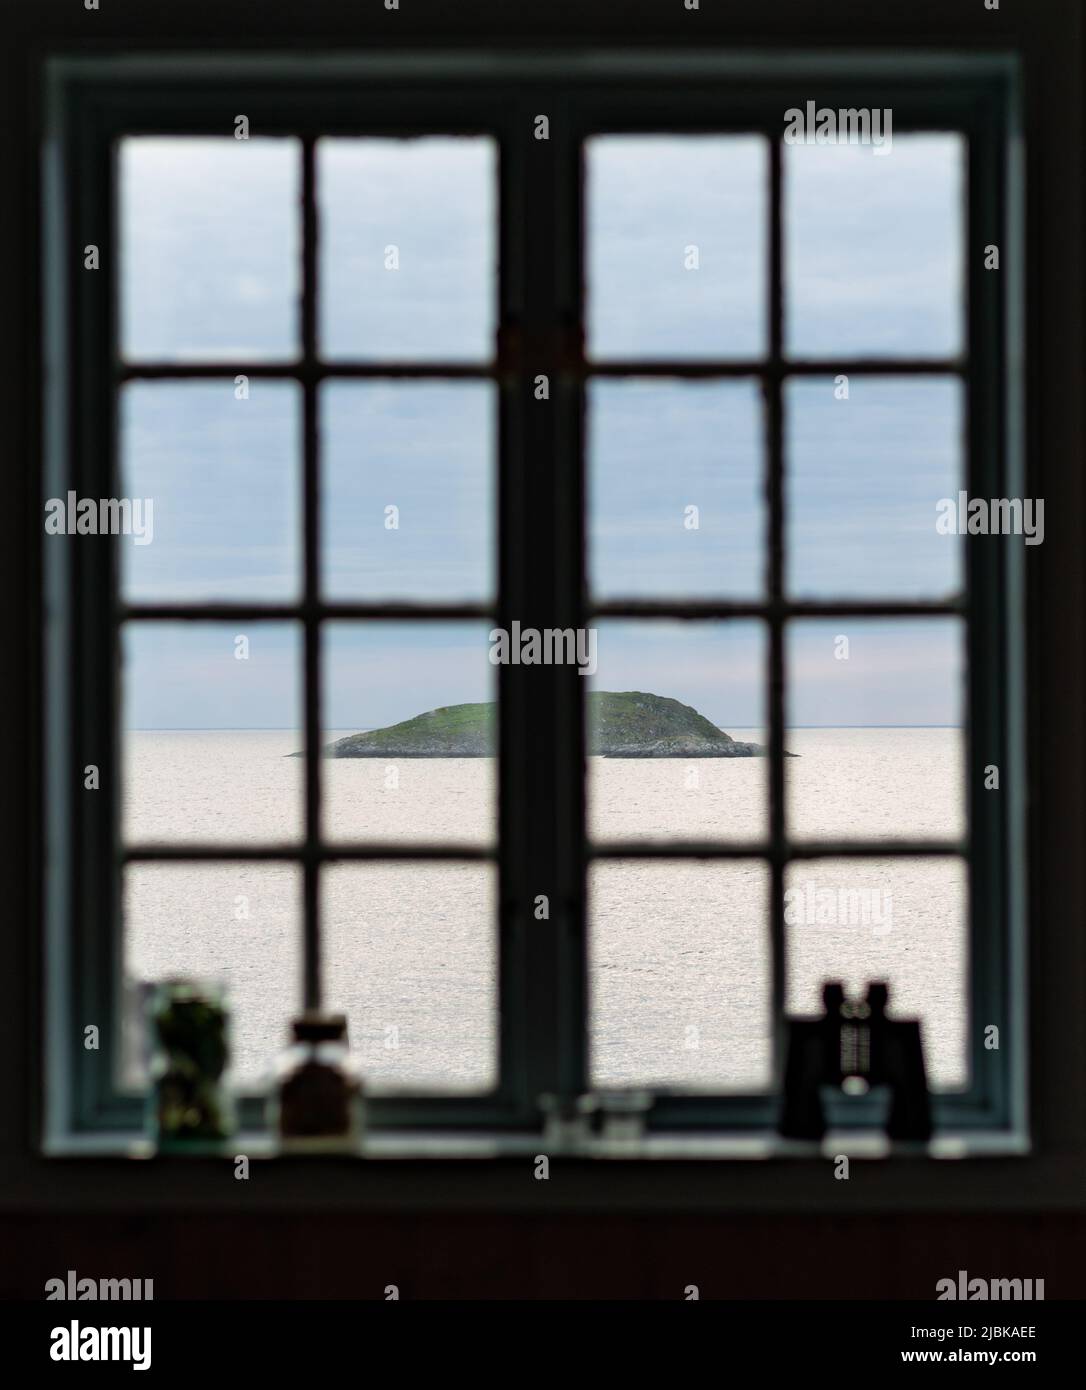 View with ocean, a island and the horison, seen through an old window. Photo taken from Kråkeslottet, Skaland, Senja. Stock Photo